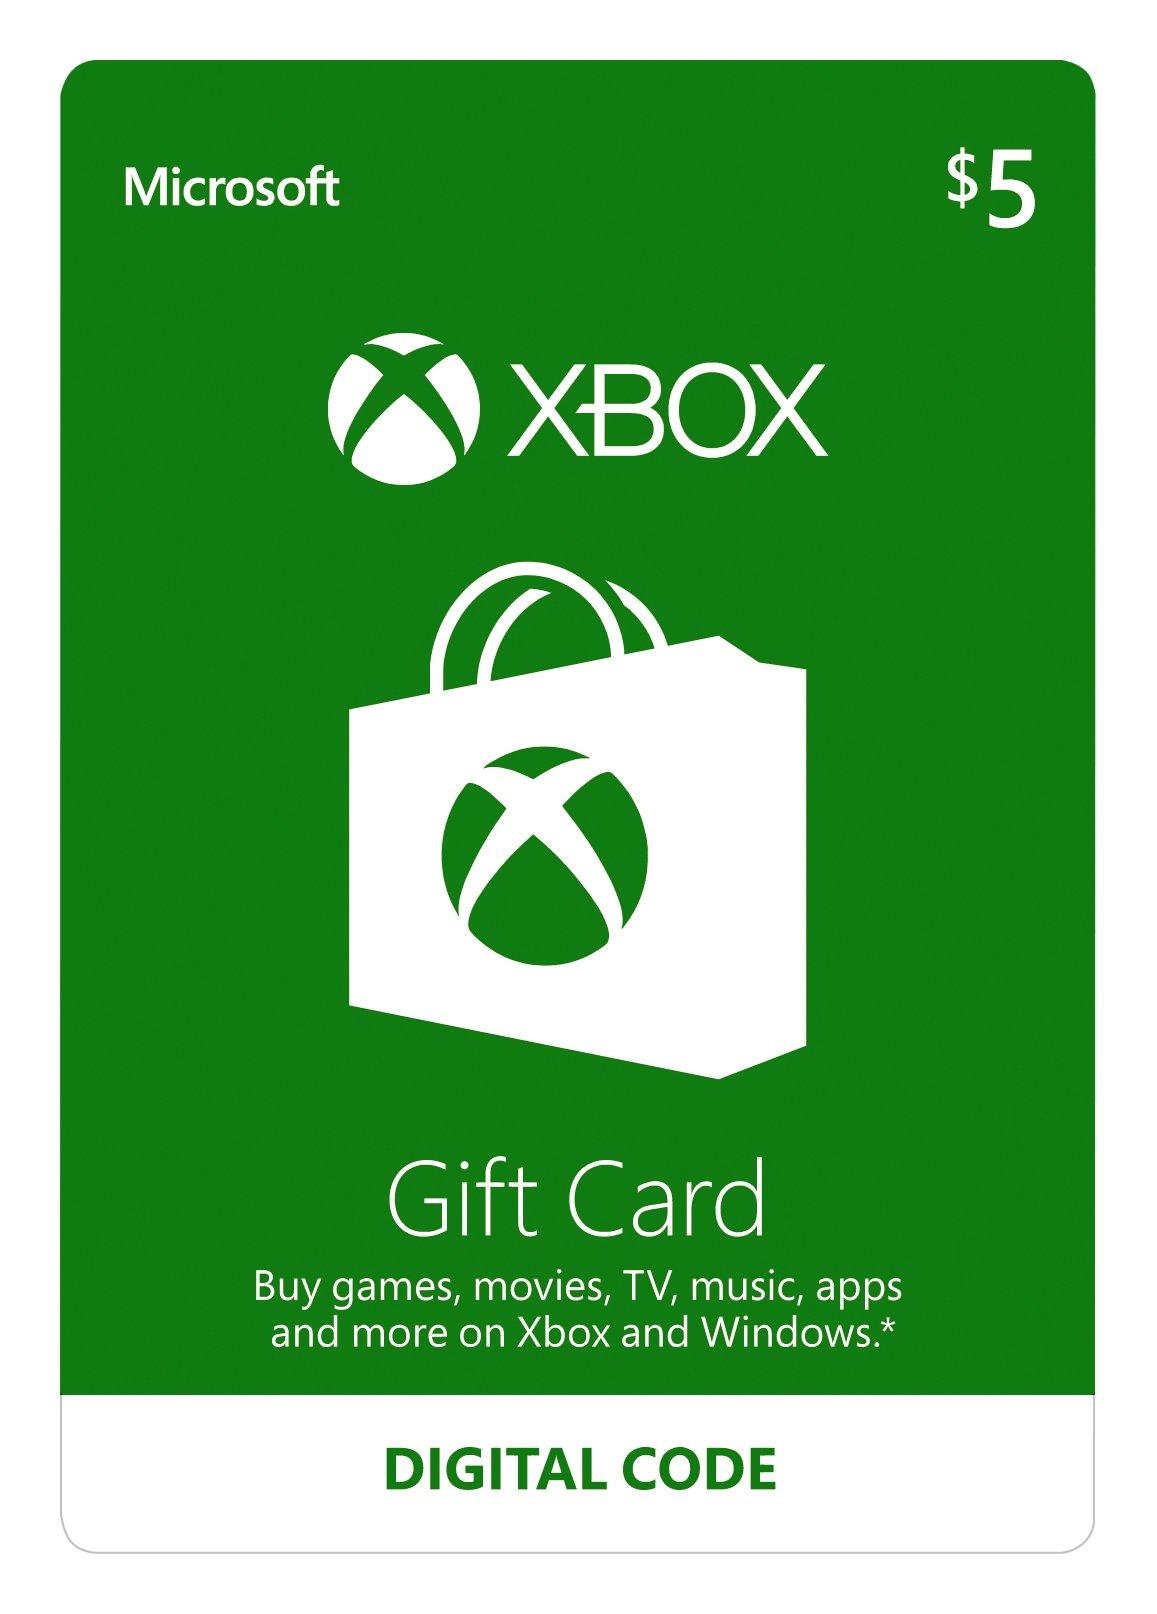 Can you use xbox gift cards to buy v bucks Can You Use Xbox Gift Cards To Buy V Bucks Off 73 Online Shopping Site For Fashion Lifestyle